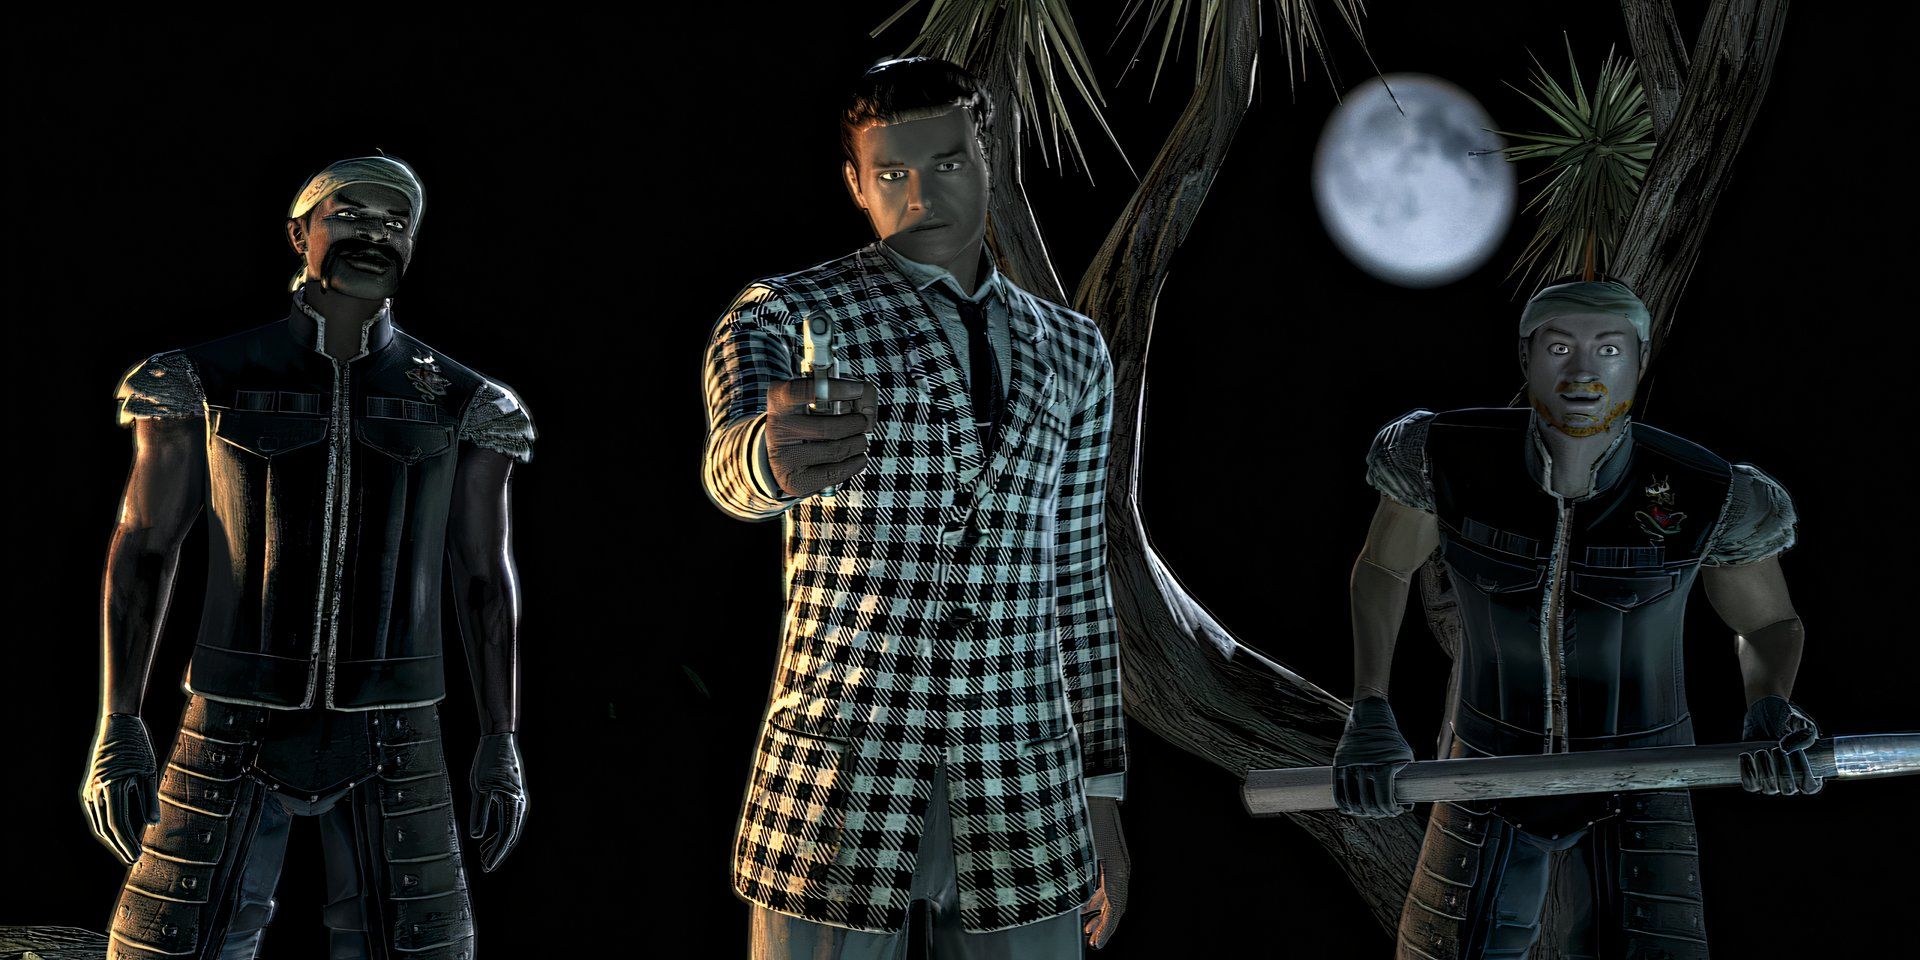 Benny, a man in a checkered suit, points a pistol toward the camera, flanked by a pair of Great Khans and the full moon, in a screenshot from Fallout New Vegas' intro.